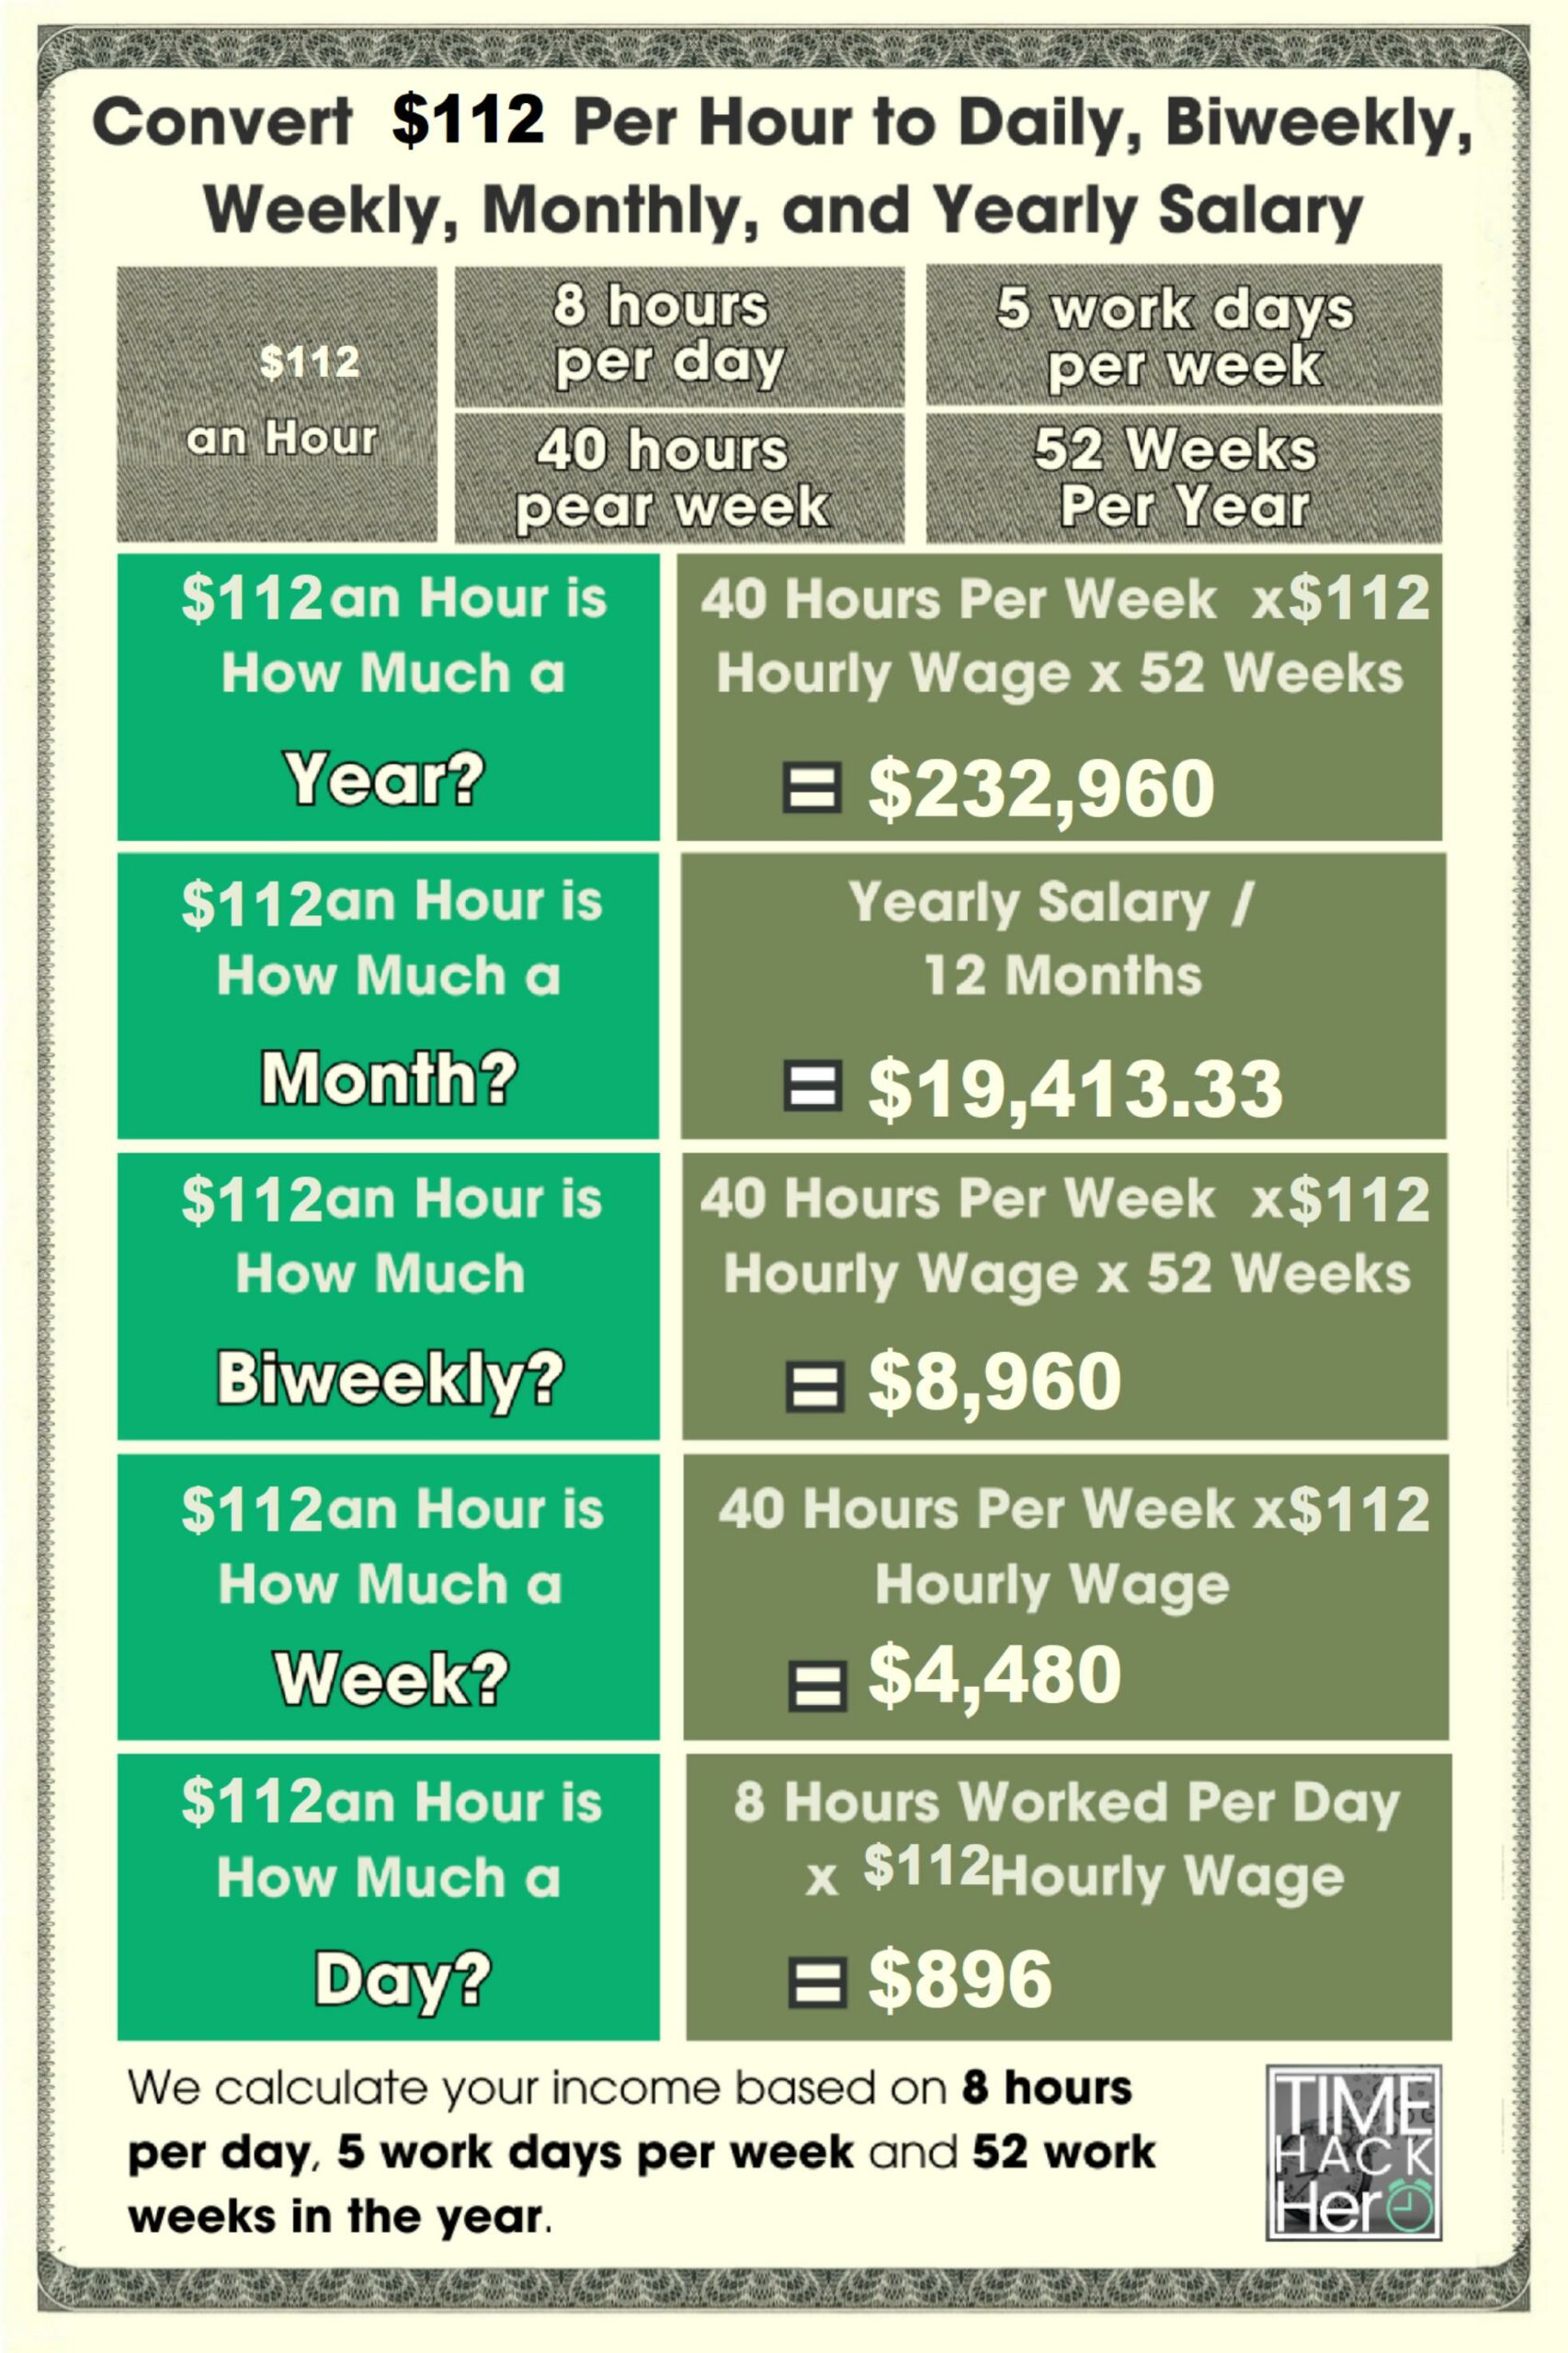 Convert $112 Per Hour to Weekly, Monthly, and Yearly Salary